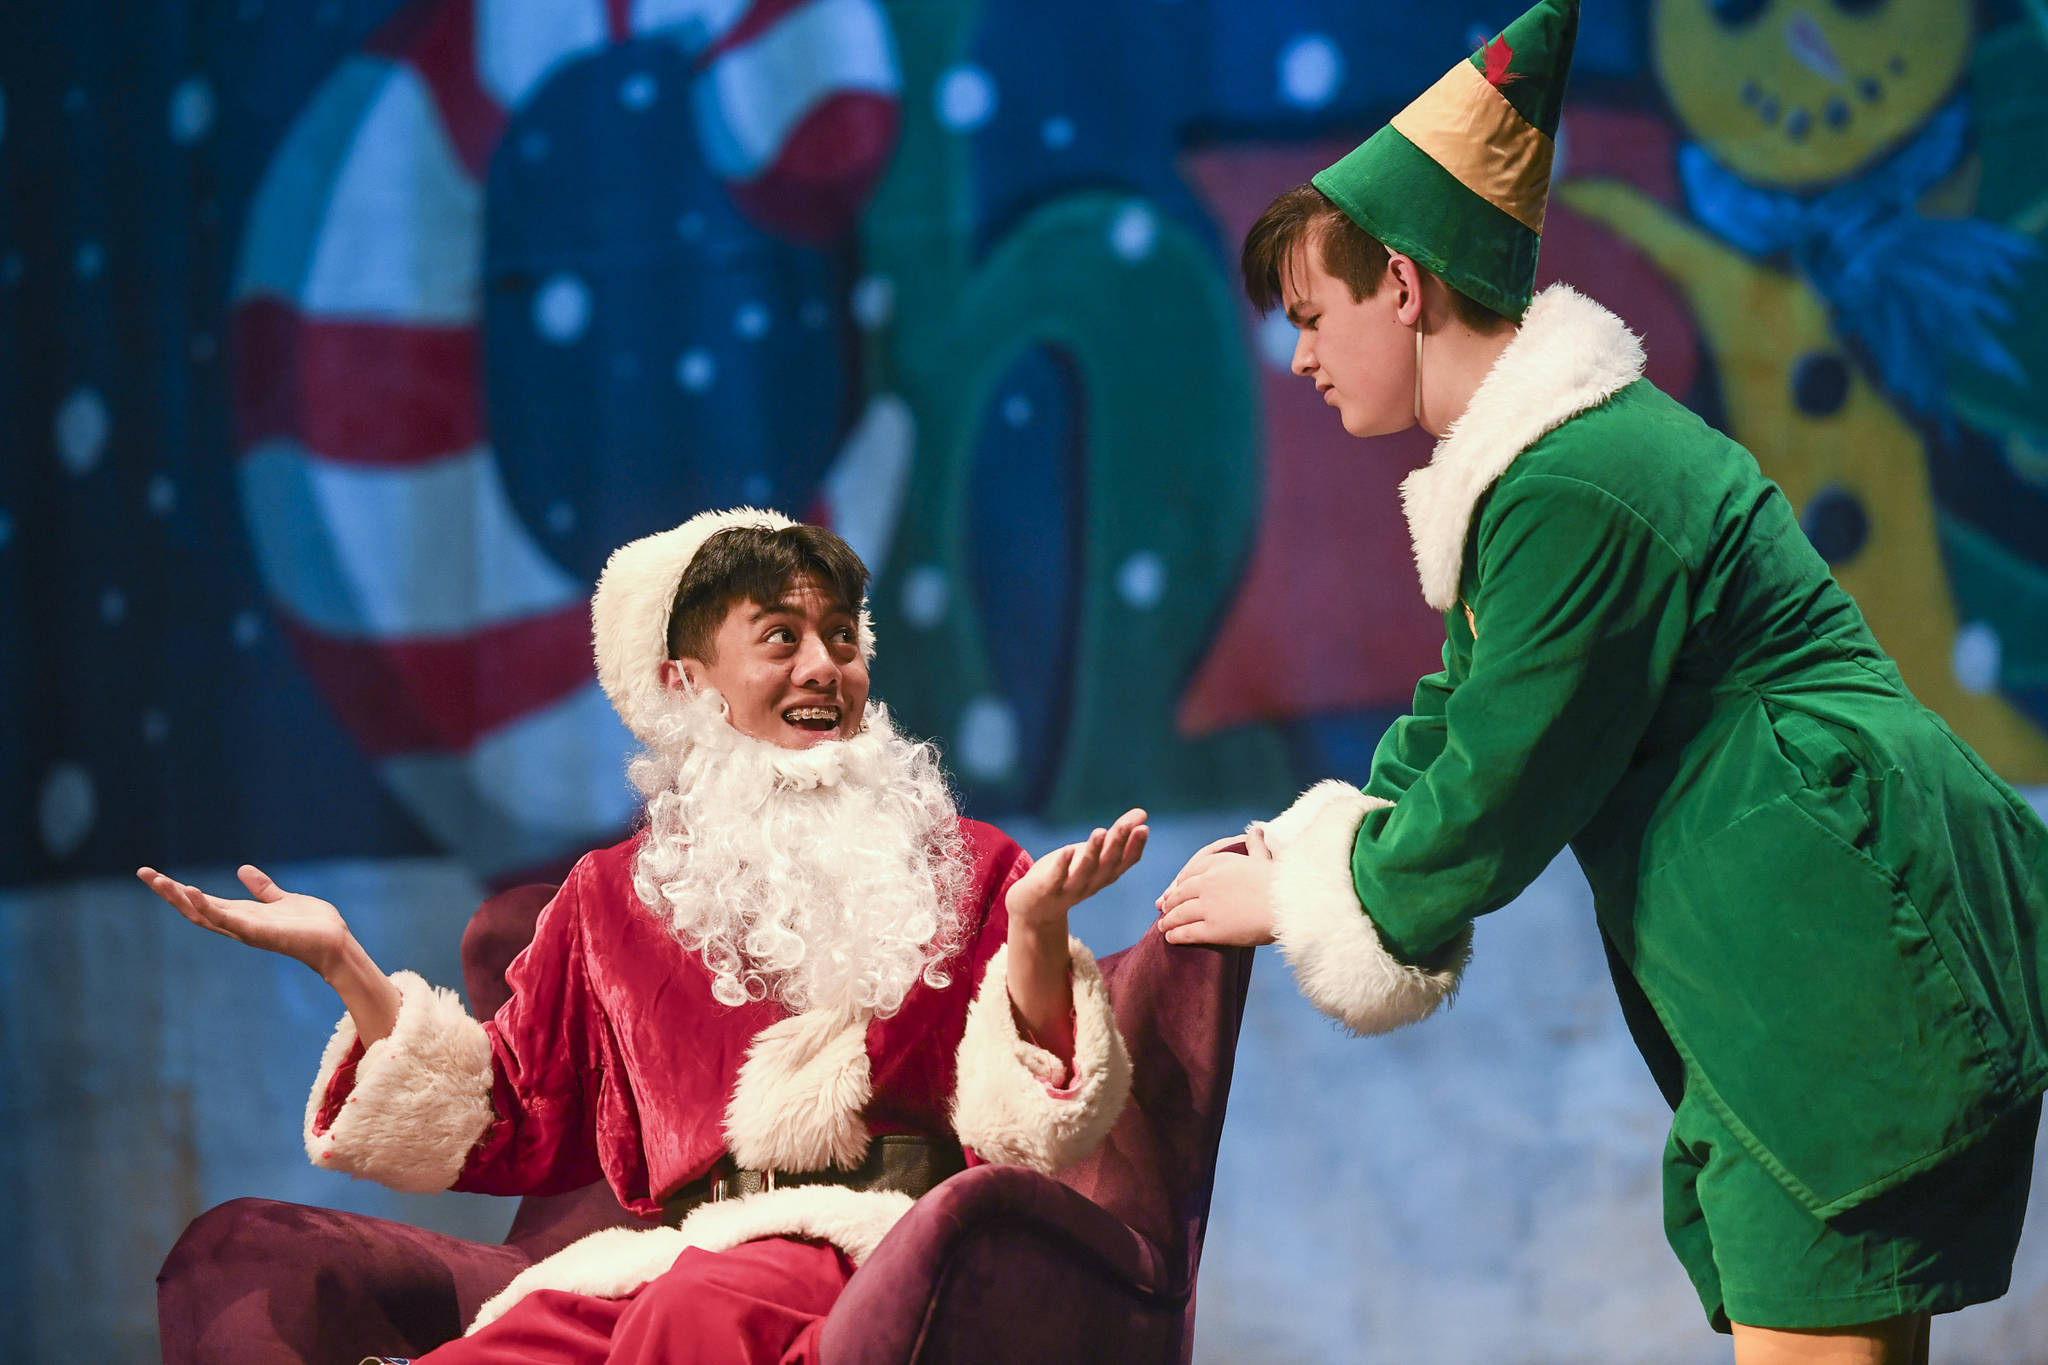 Fake Santa, played by Richard Corpuz, left, and Buddy the Elf, played by Toby Russell, rehearse in “Elf the Musicial” at Juneau-Douglas High School: Yadaa.at Kalé on Friday, Dec. 13, 2019. (Michael Penn | Juneau Empire)